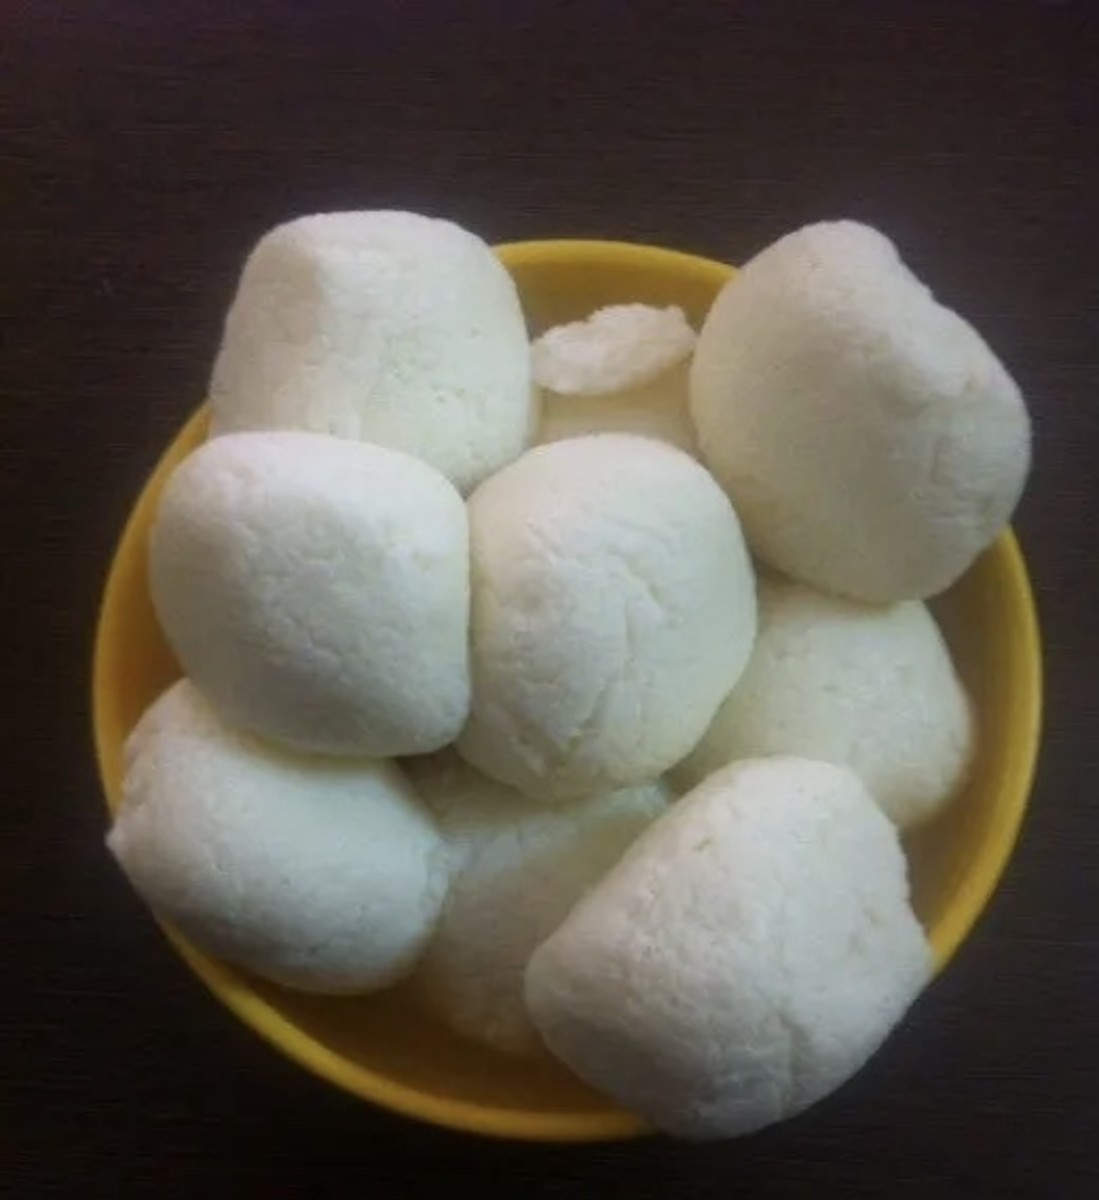 Rasgulla is another popular Indian dessert that is also made with paneer.